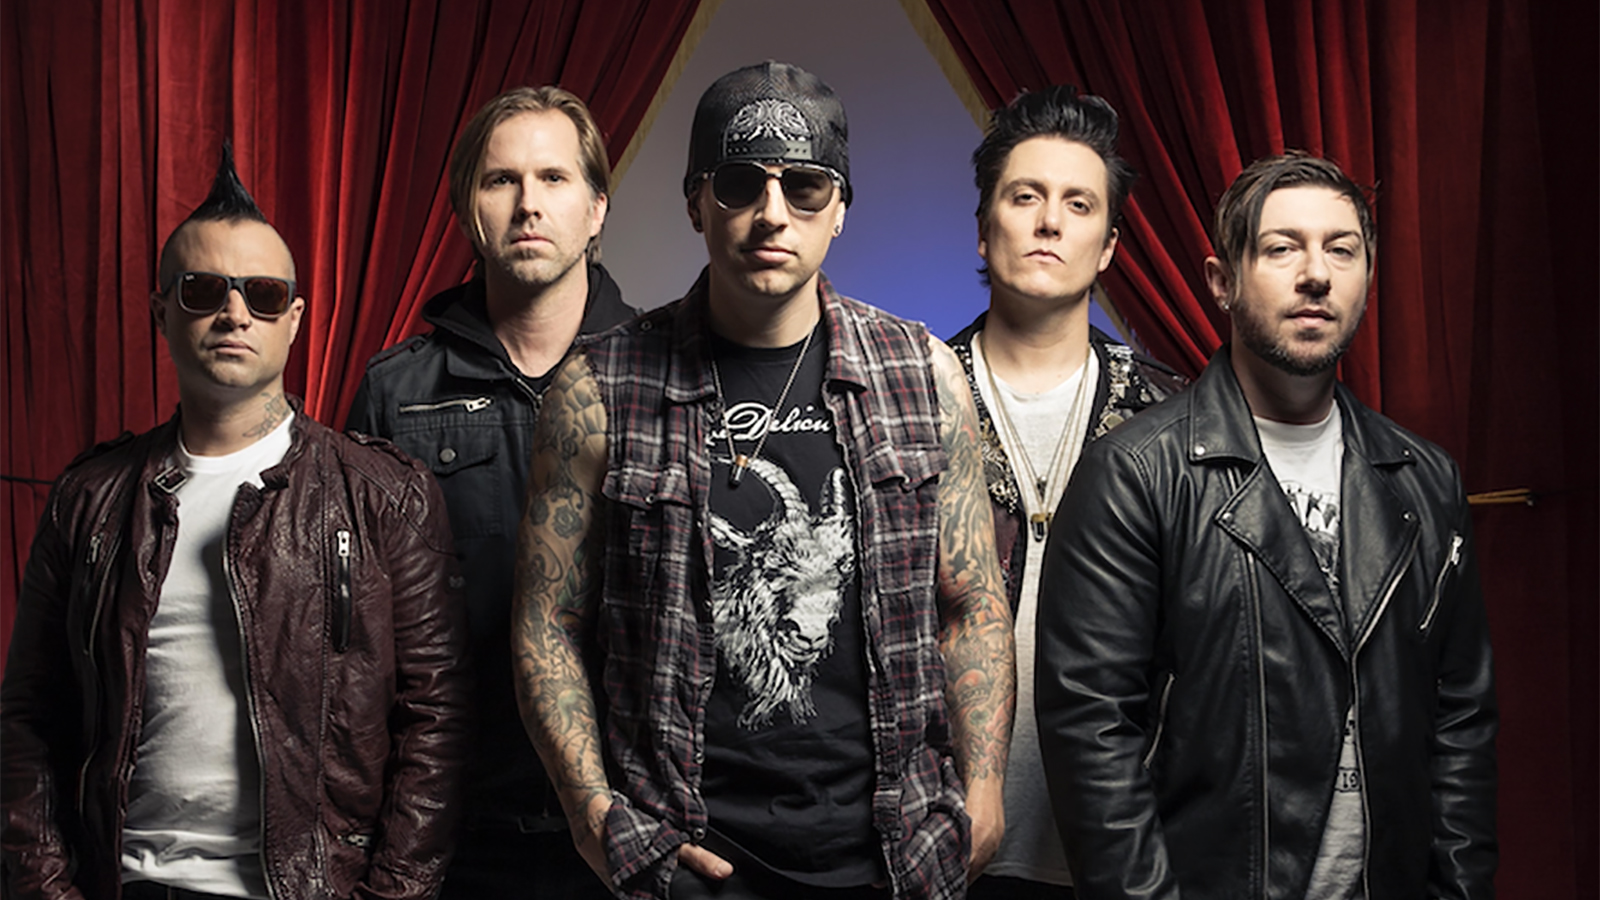 Avenged Sevenfold, Music Discography Wiki